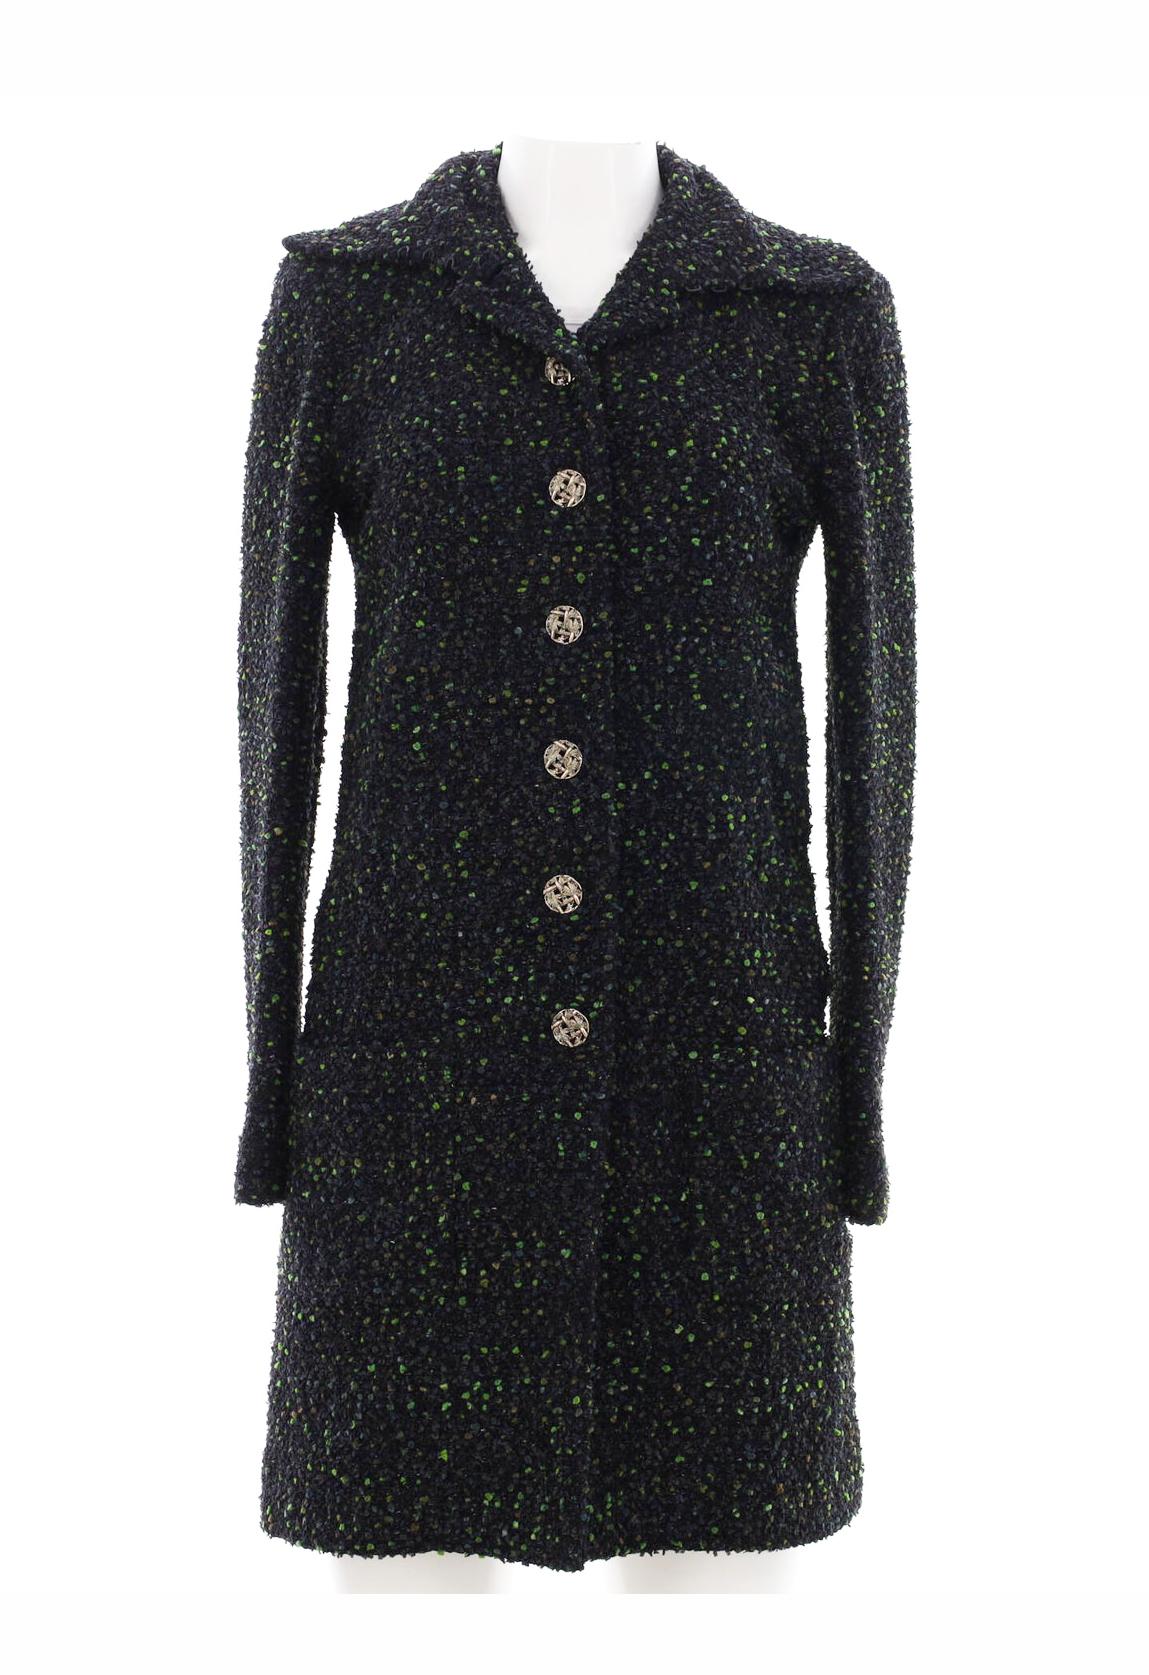 New gorgeous lesage tweed coat Chanel from Runway of ''AUTUMN FOREST